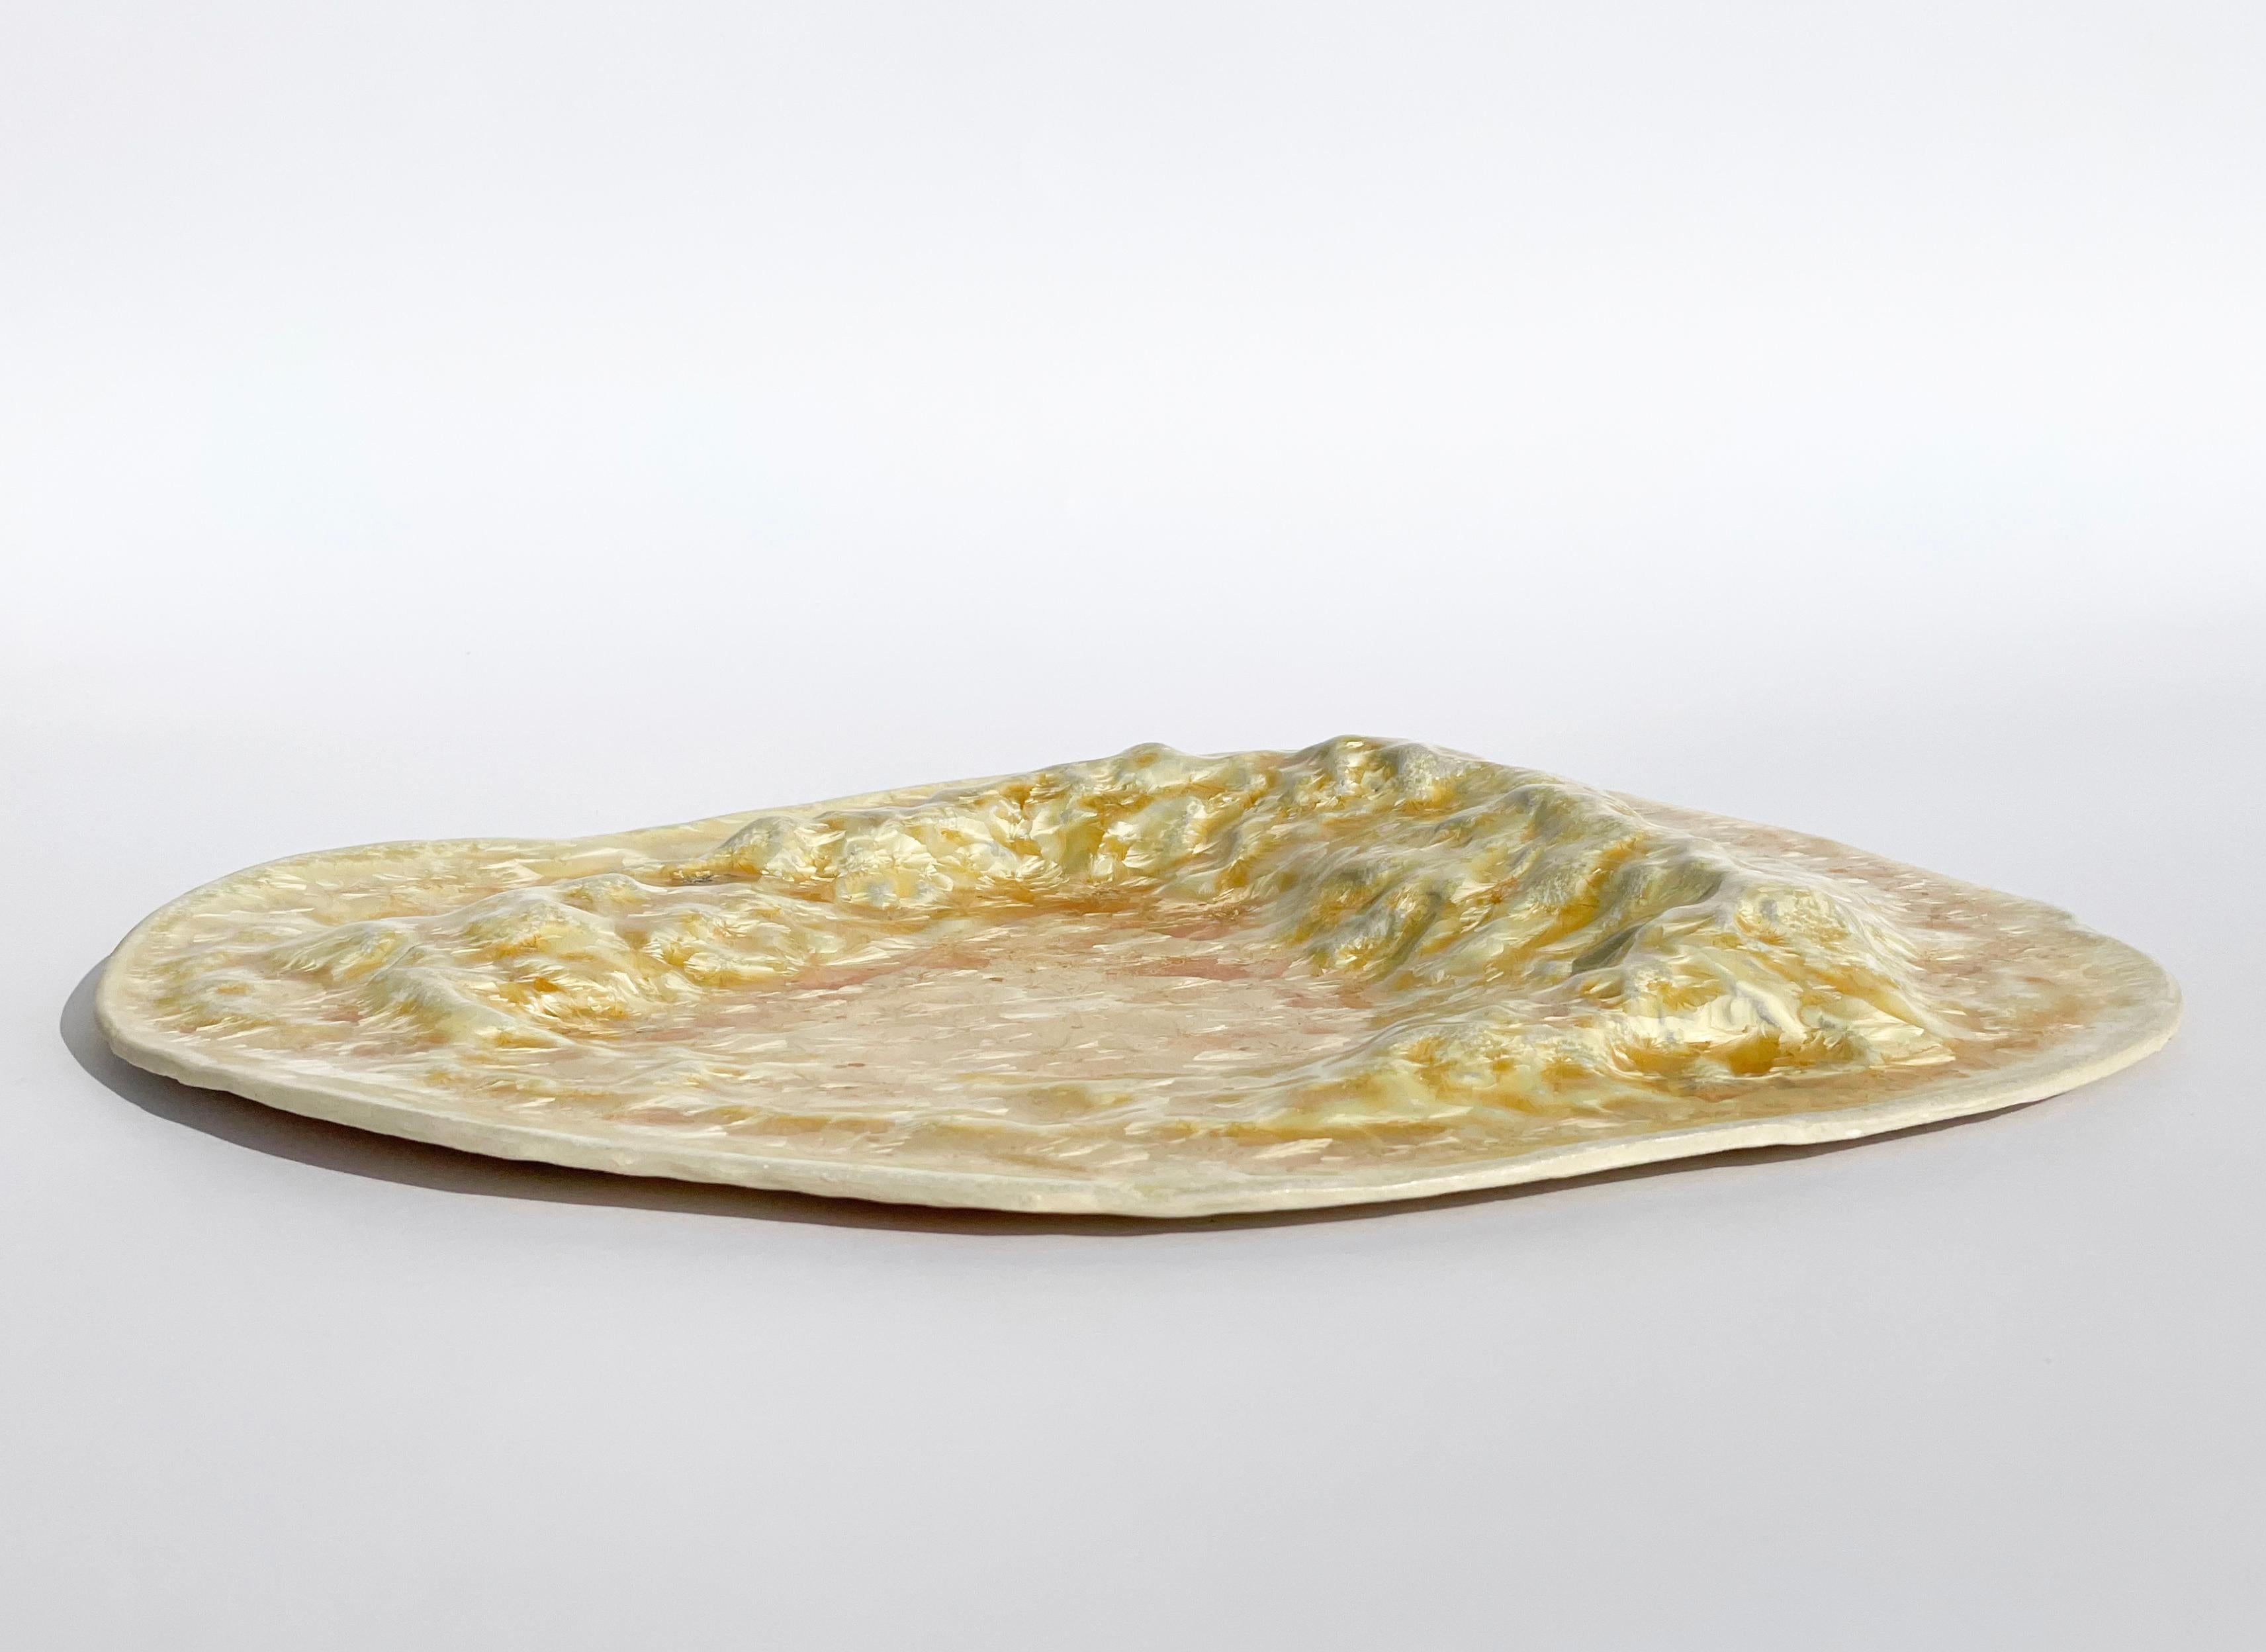 Gongshi plates

Hand made Unique Undulating Form Plates, Objet d'Art in Crystalline glaze 

These sculptural plates are taking inspiration from the Chinese ‘gongshi’
‘Gongshi (Chinese: ??), also known as scholar's rocks, are naturally occurring